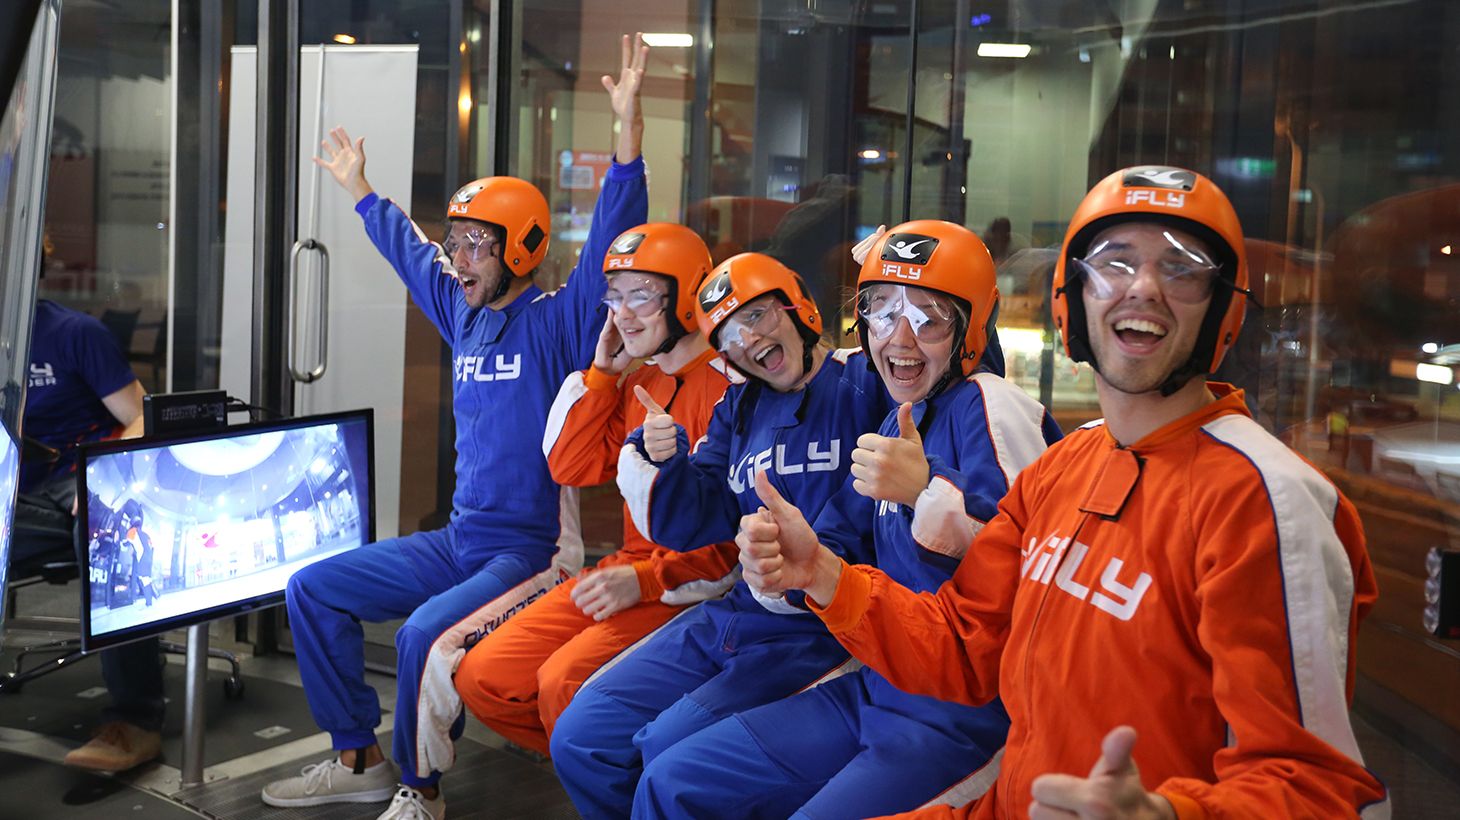 Sydney: Exhilarating Indoor Skydiving Experience for First-Time Flyers in Penrith